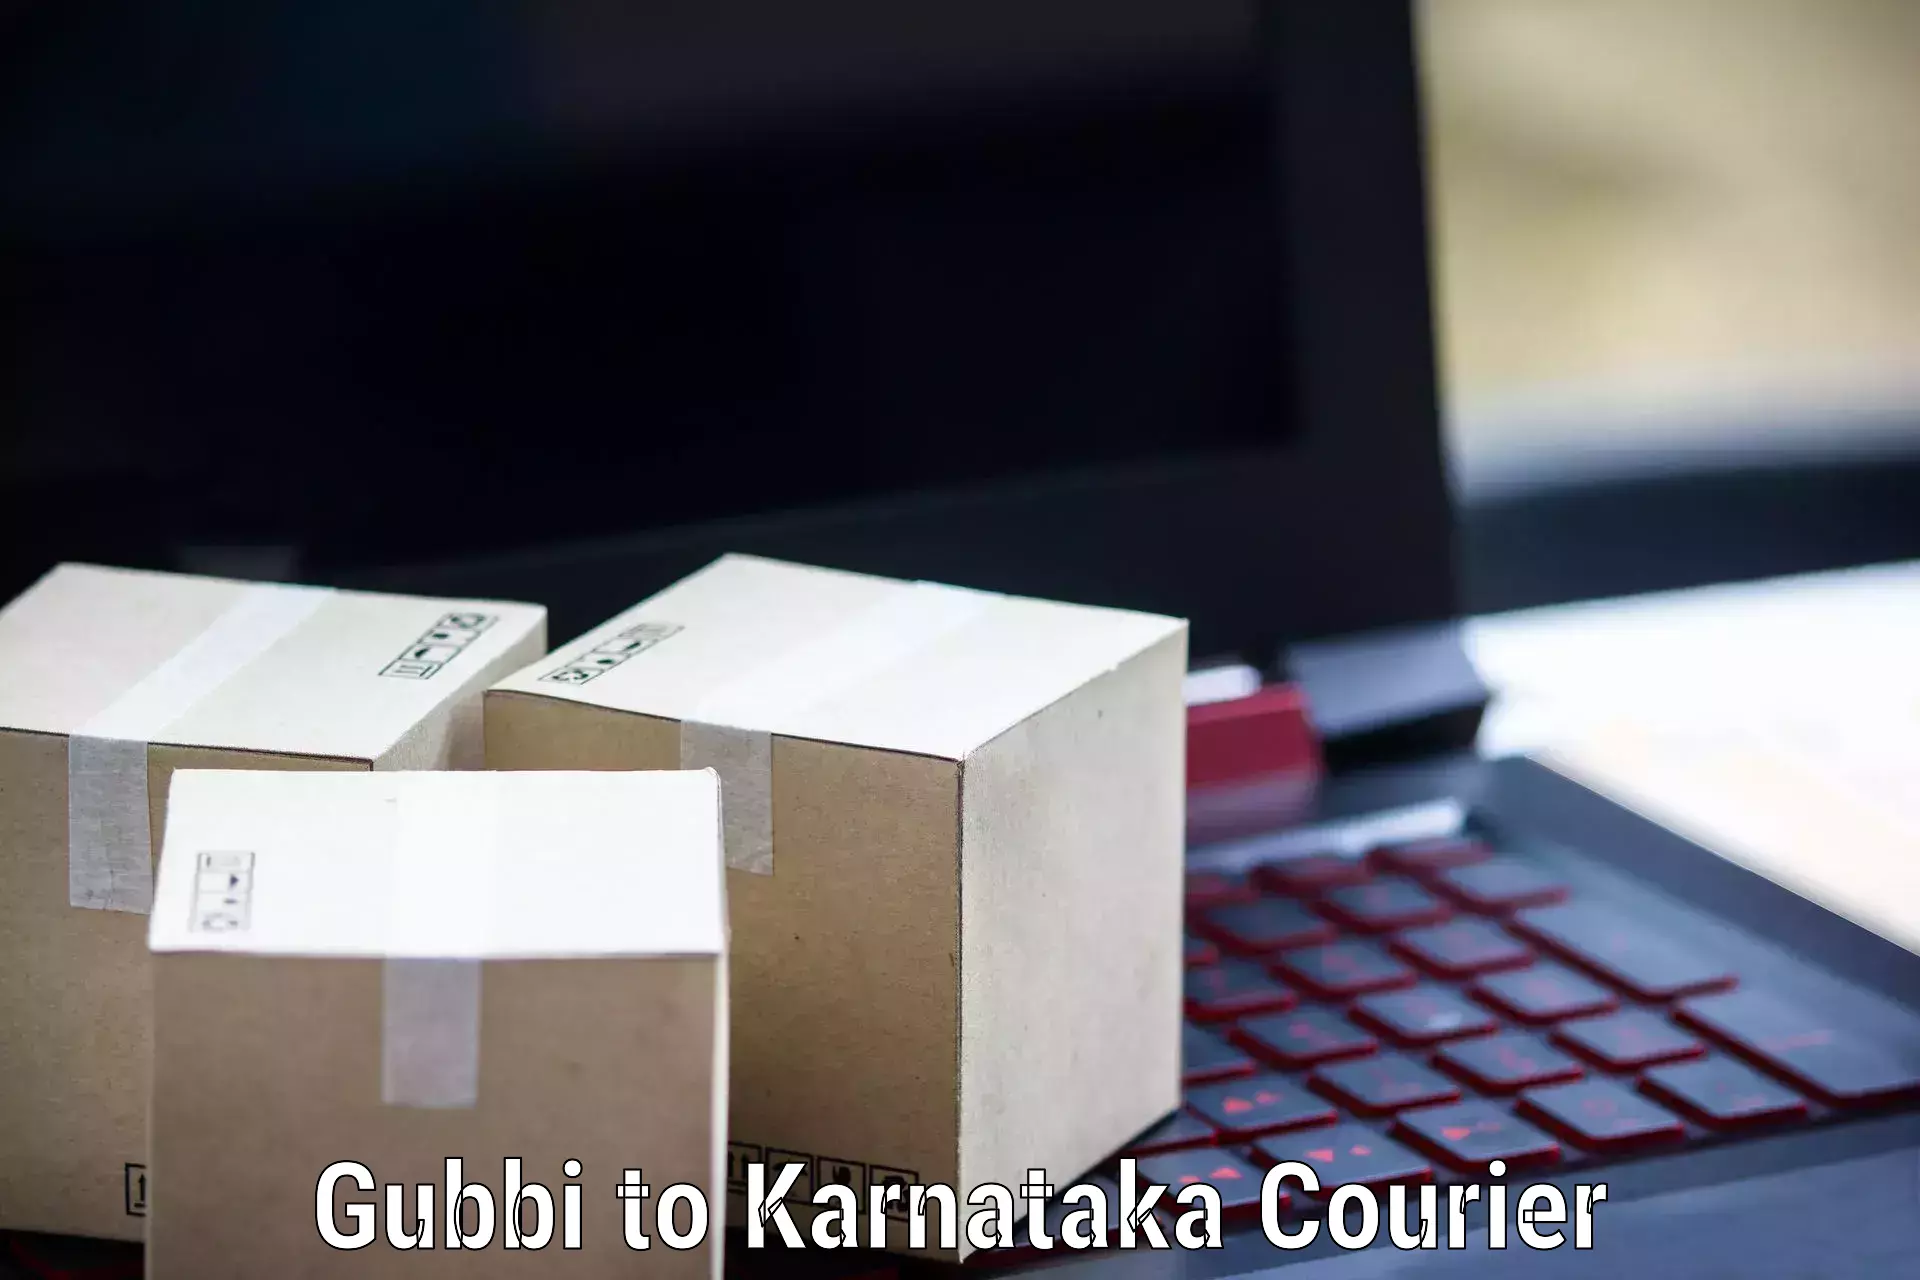 State-of-the-art courier technology Gubbi to Hoovina Hadagali